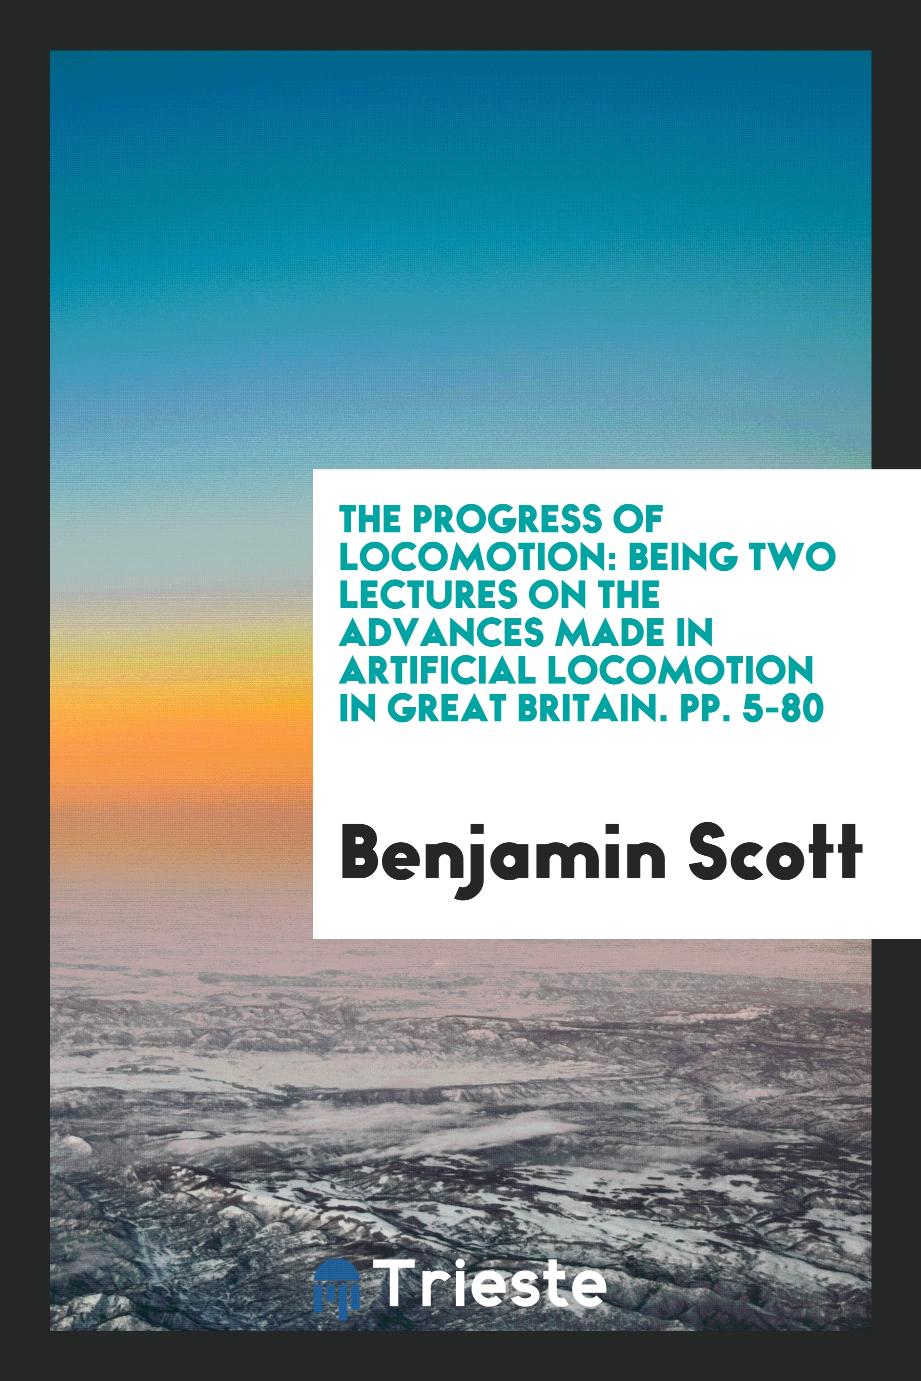 The Progress of Locomotion: Being Two Lectures on the Advances Made in Artificial Locomotion in Great Britain. pp. 5-80